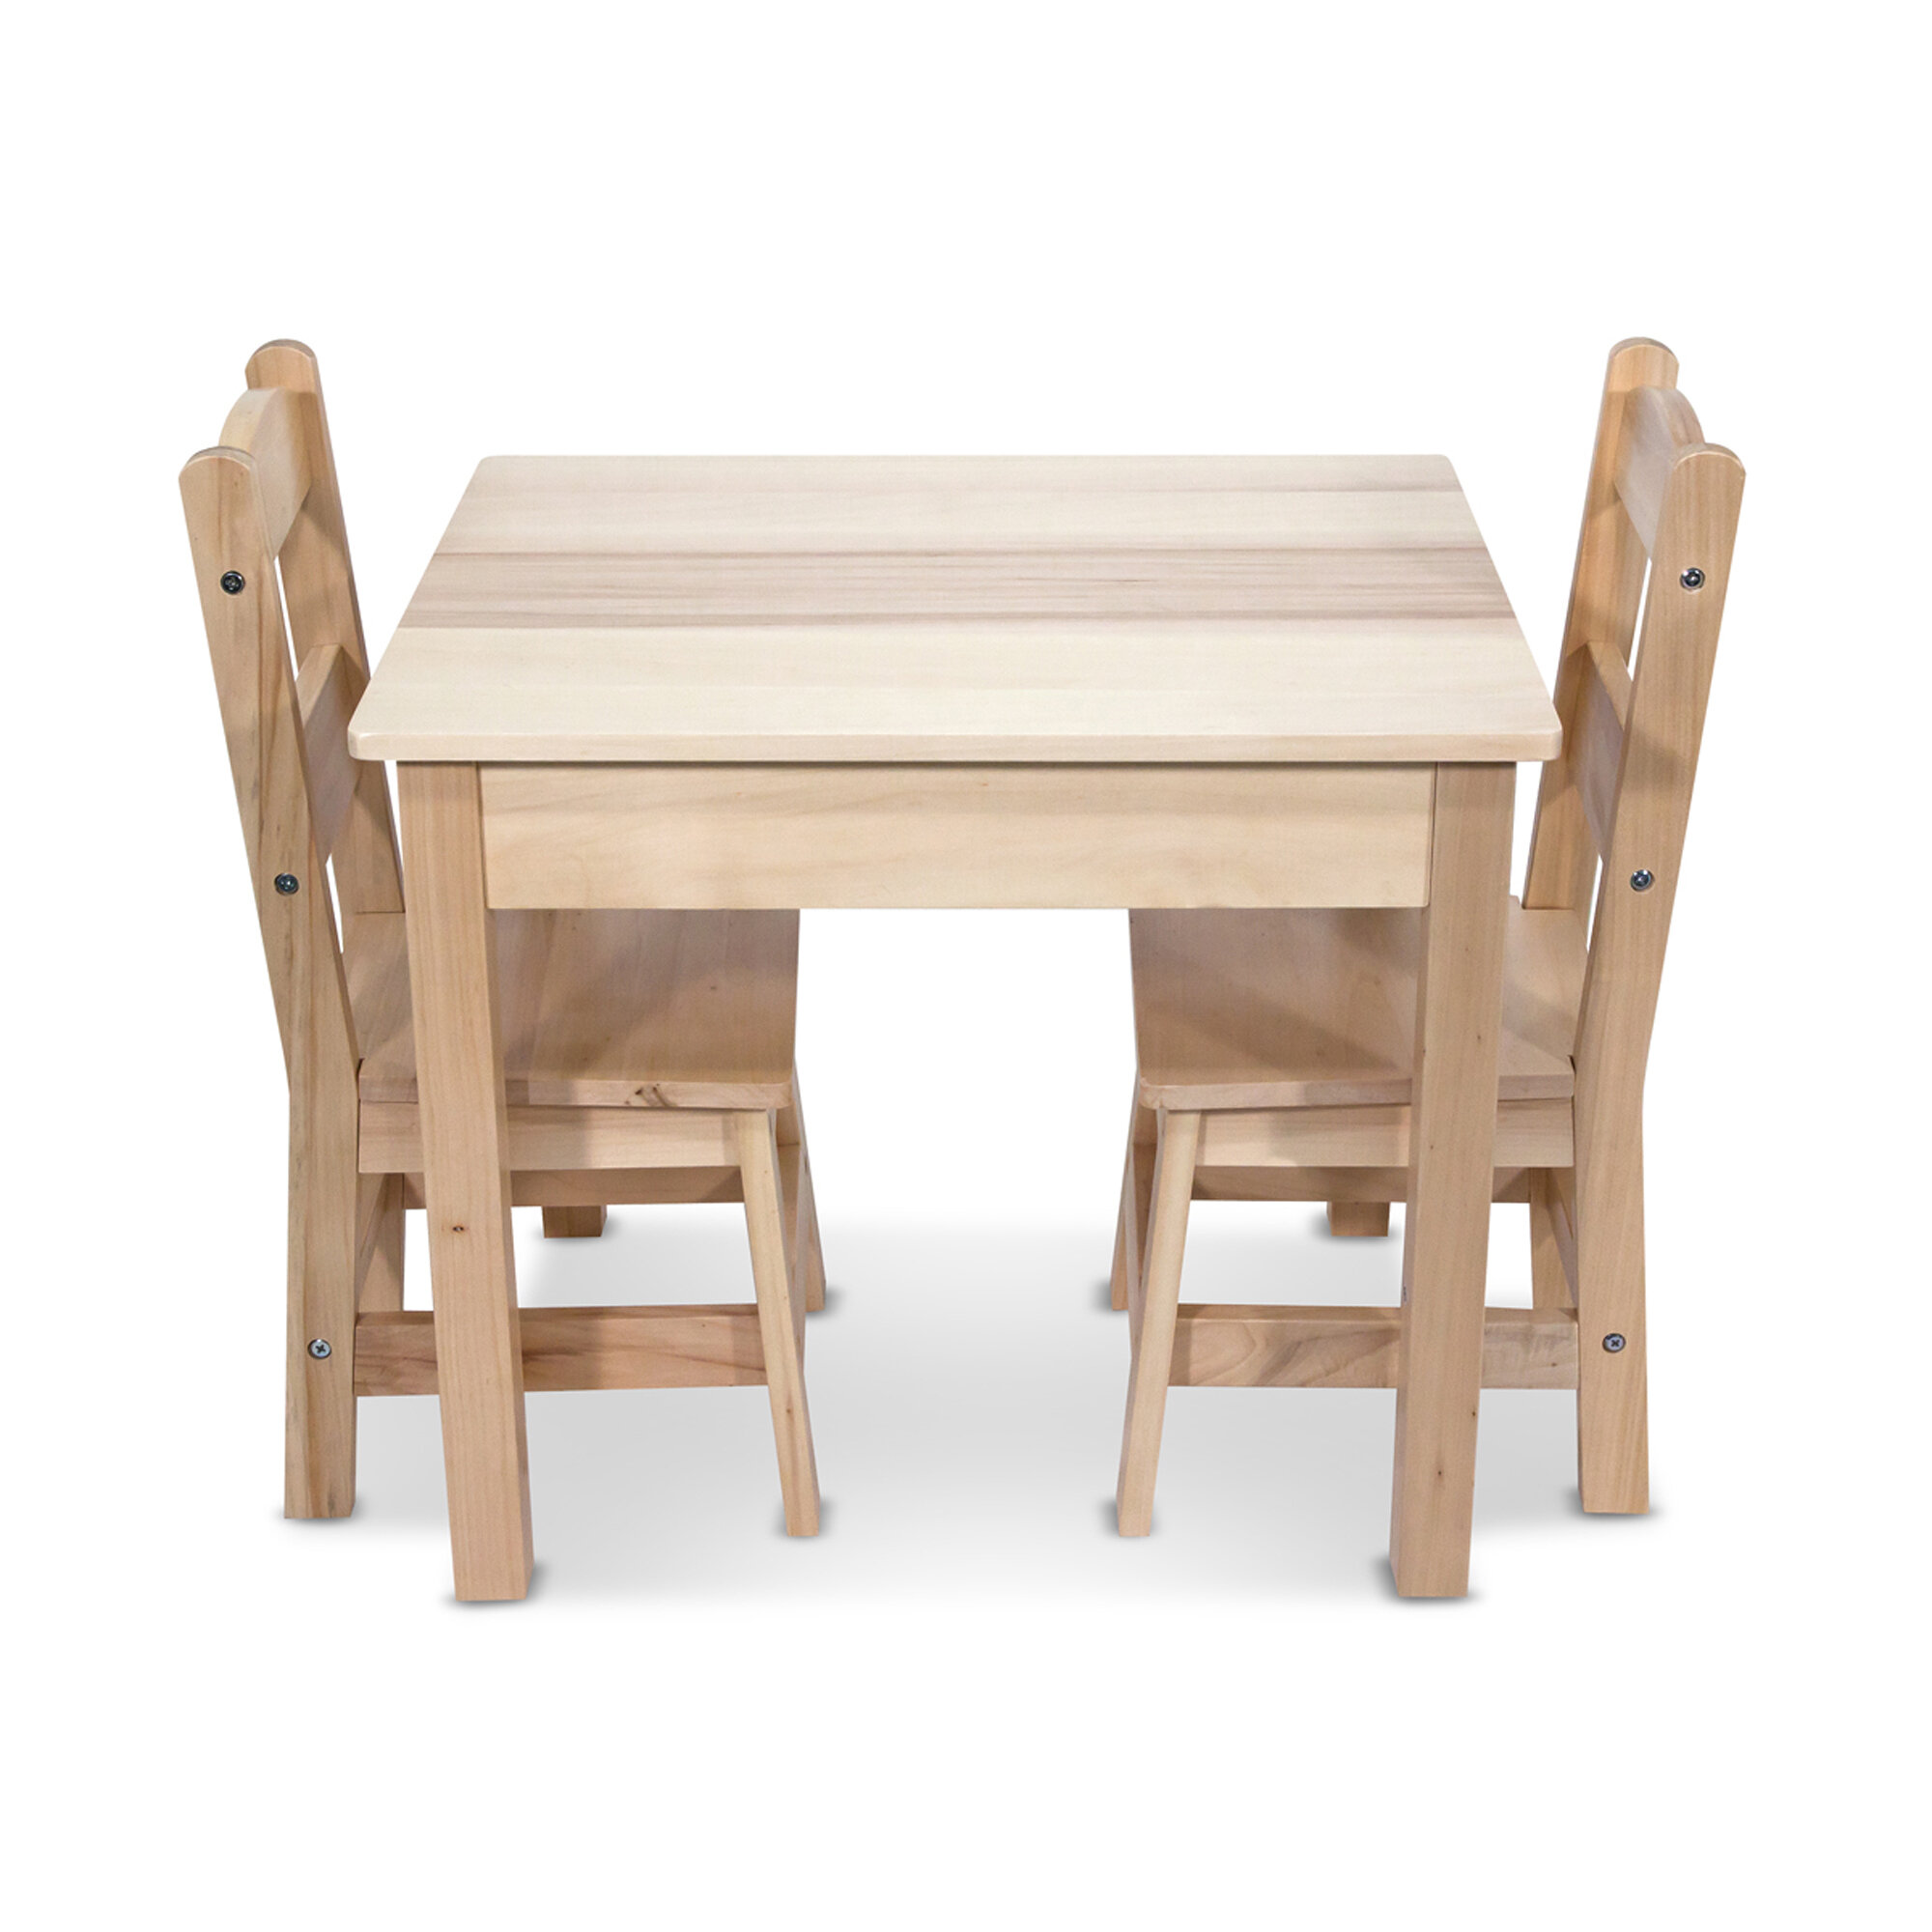 Melissa Doug Kids 3 Piece Play Table And Chairs Set Reviews